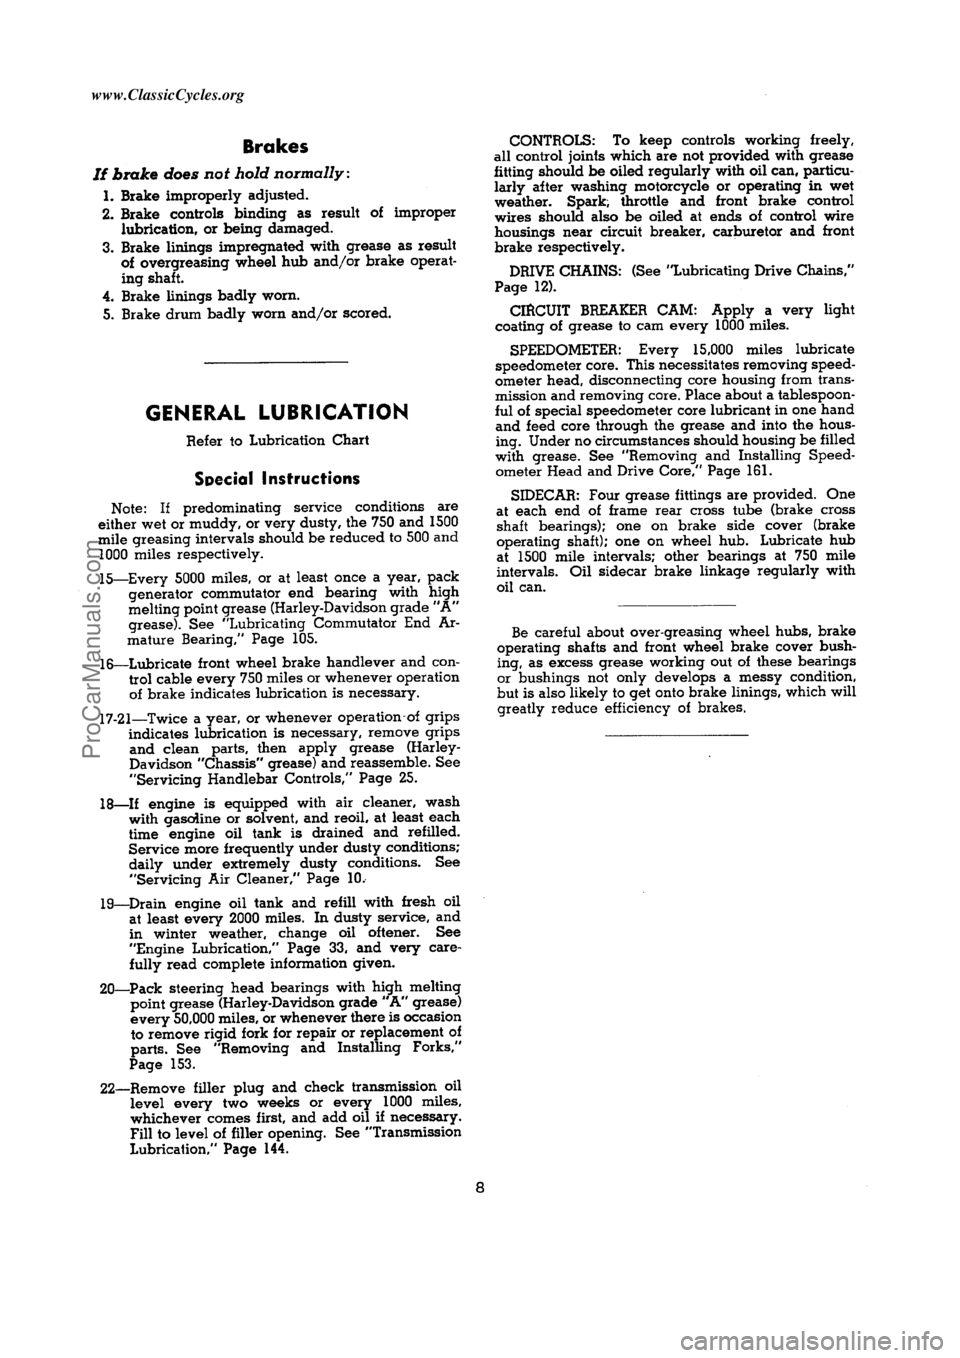 HARLEY-DAVIDSON KNUCKLEHEAD 1940  Service Manual  [8]ProCarManuals.com     www.ClassicCycles.org  